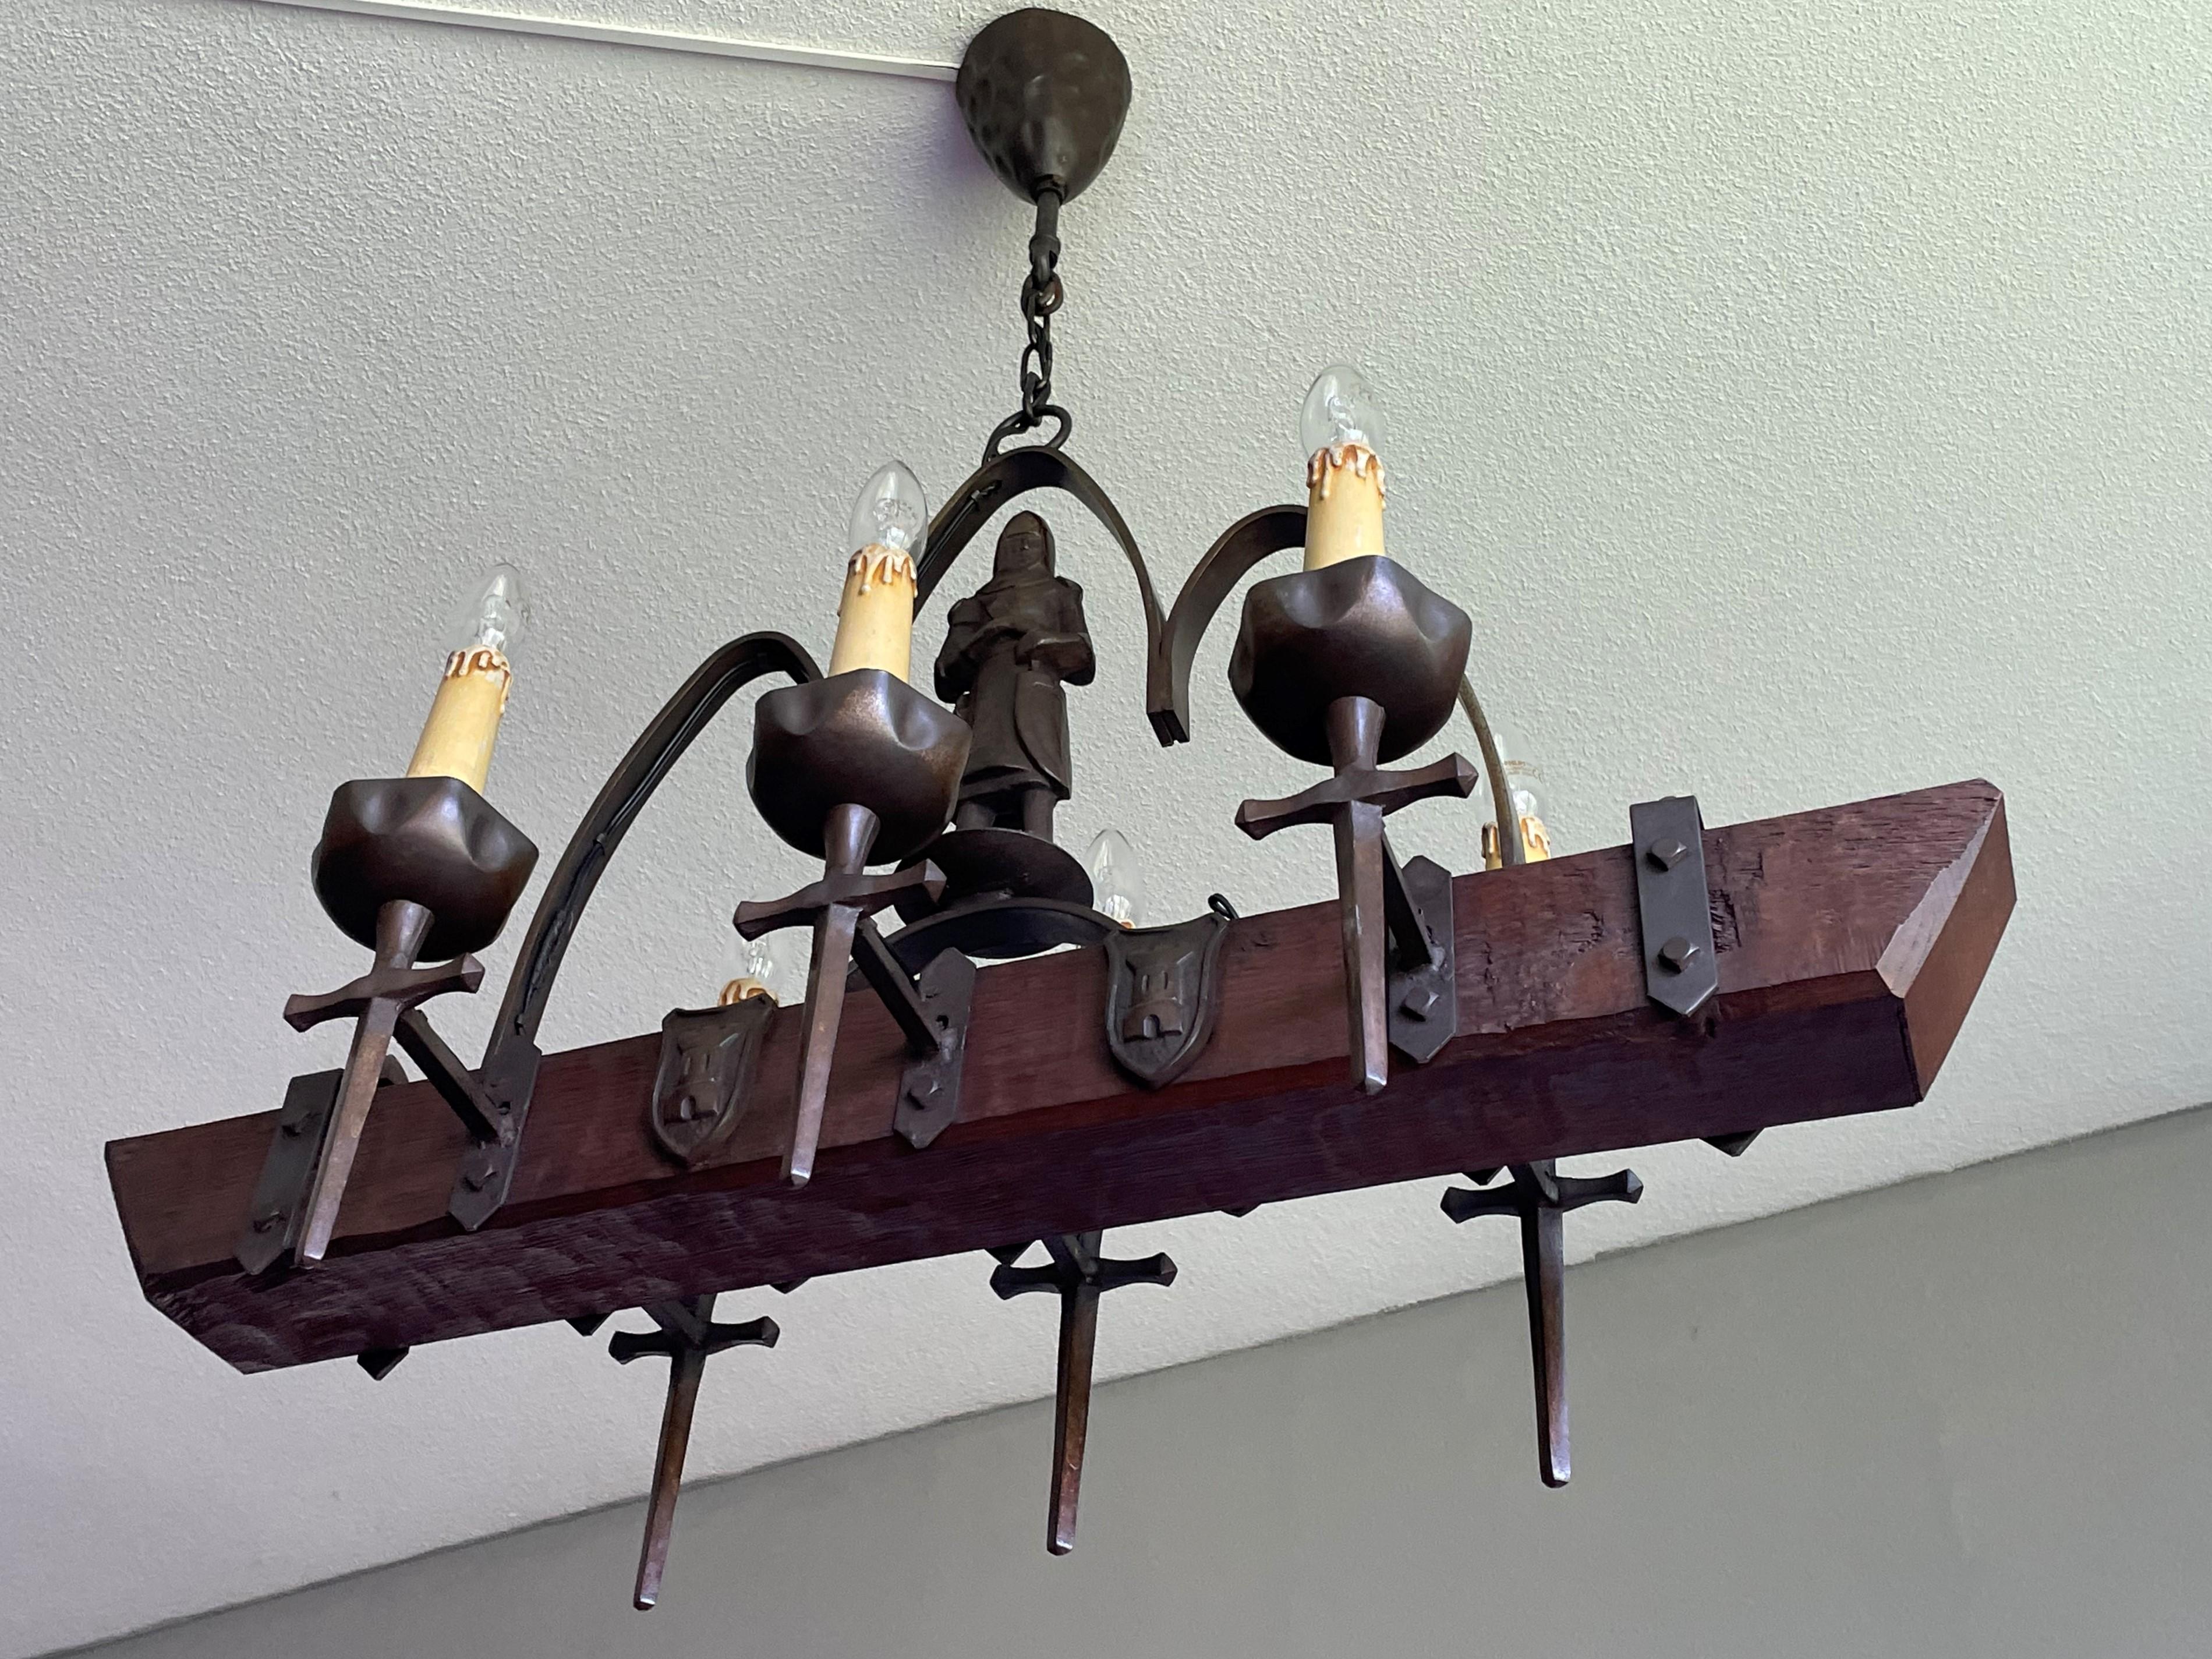 Highly decorative, wrought iron, cast iron & oak Medieval Style chandelier.

With 20th century lighting as one of our specialities, we have seen a lot of great and unique fixtures, but never before did we come across an antique handcrafted Mediëval